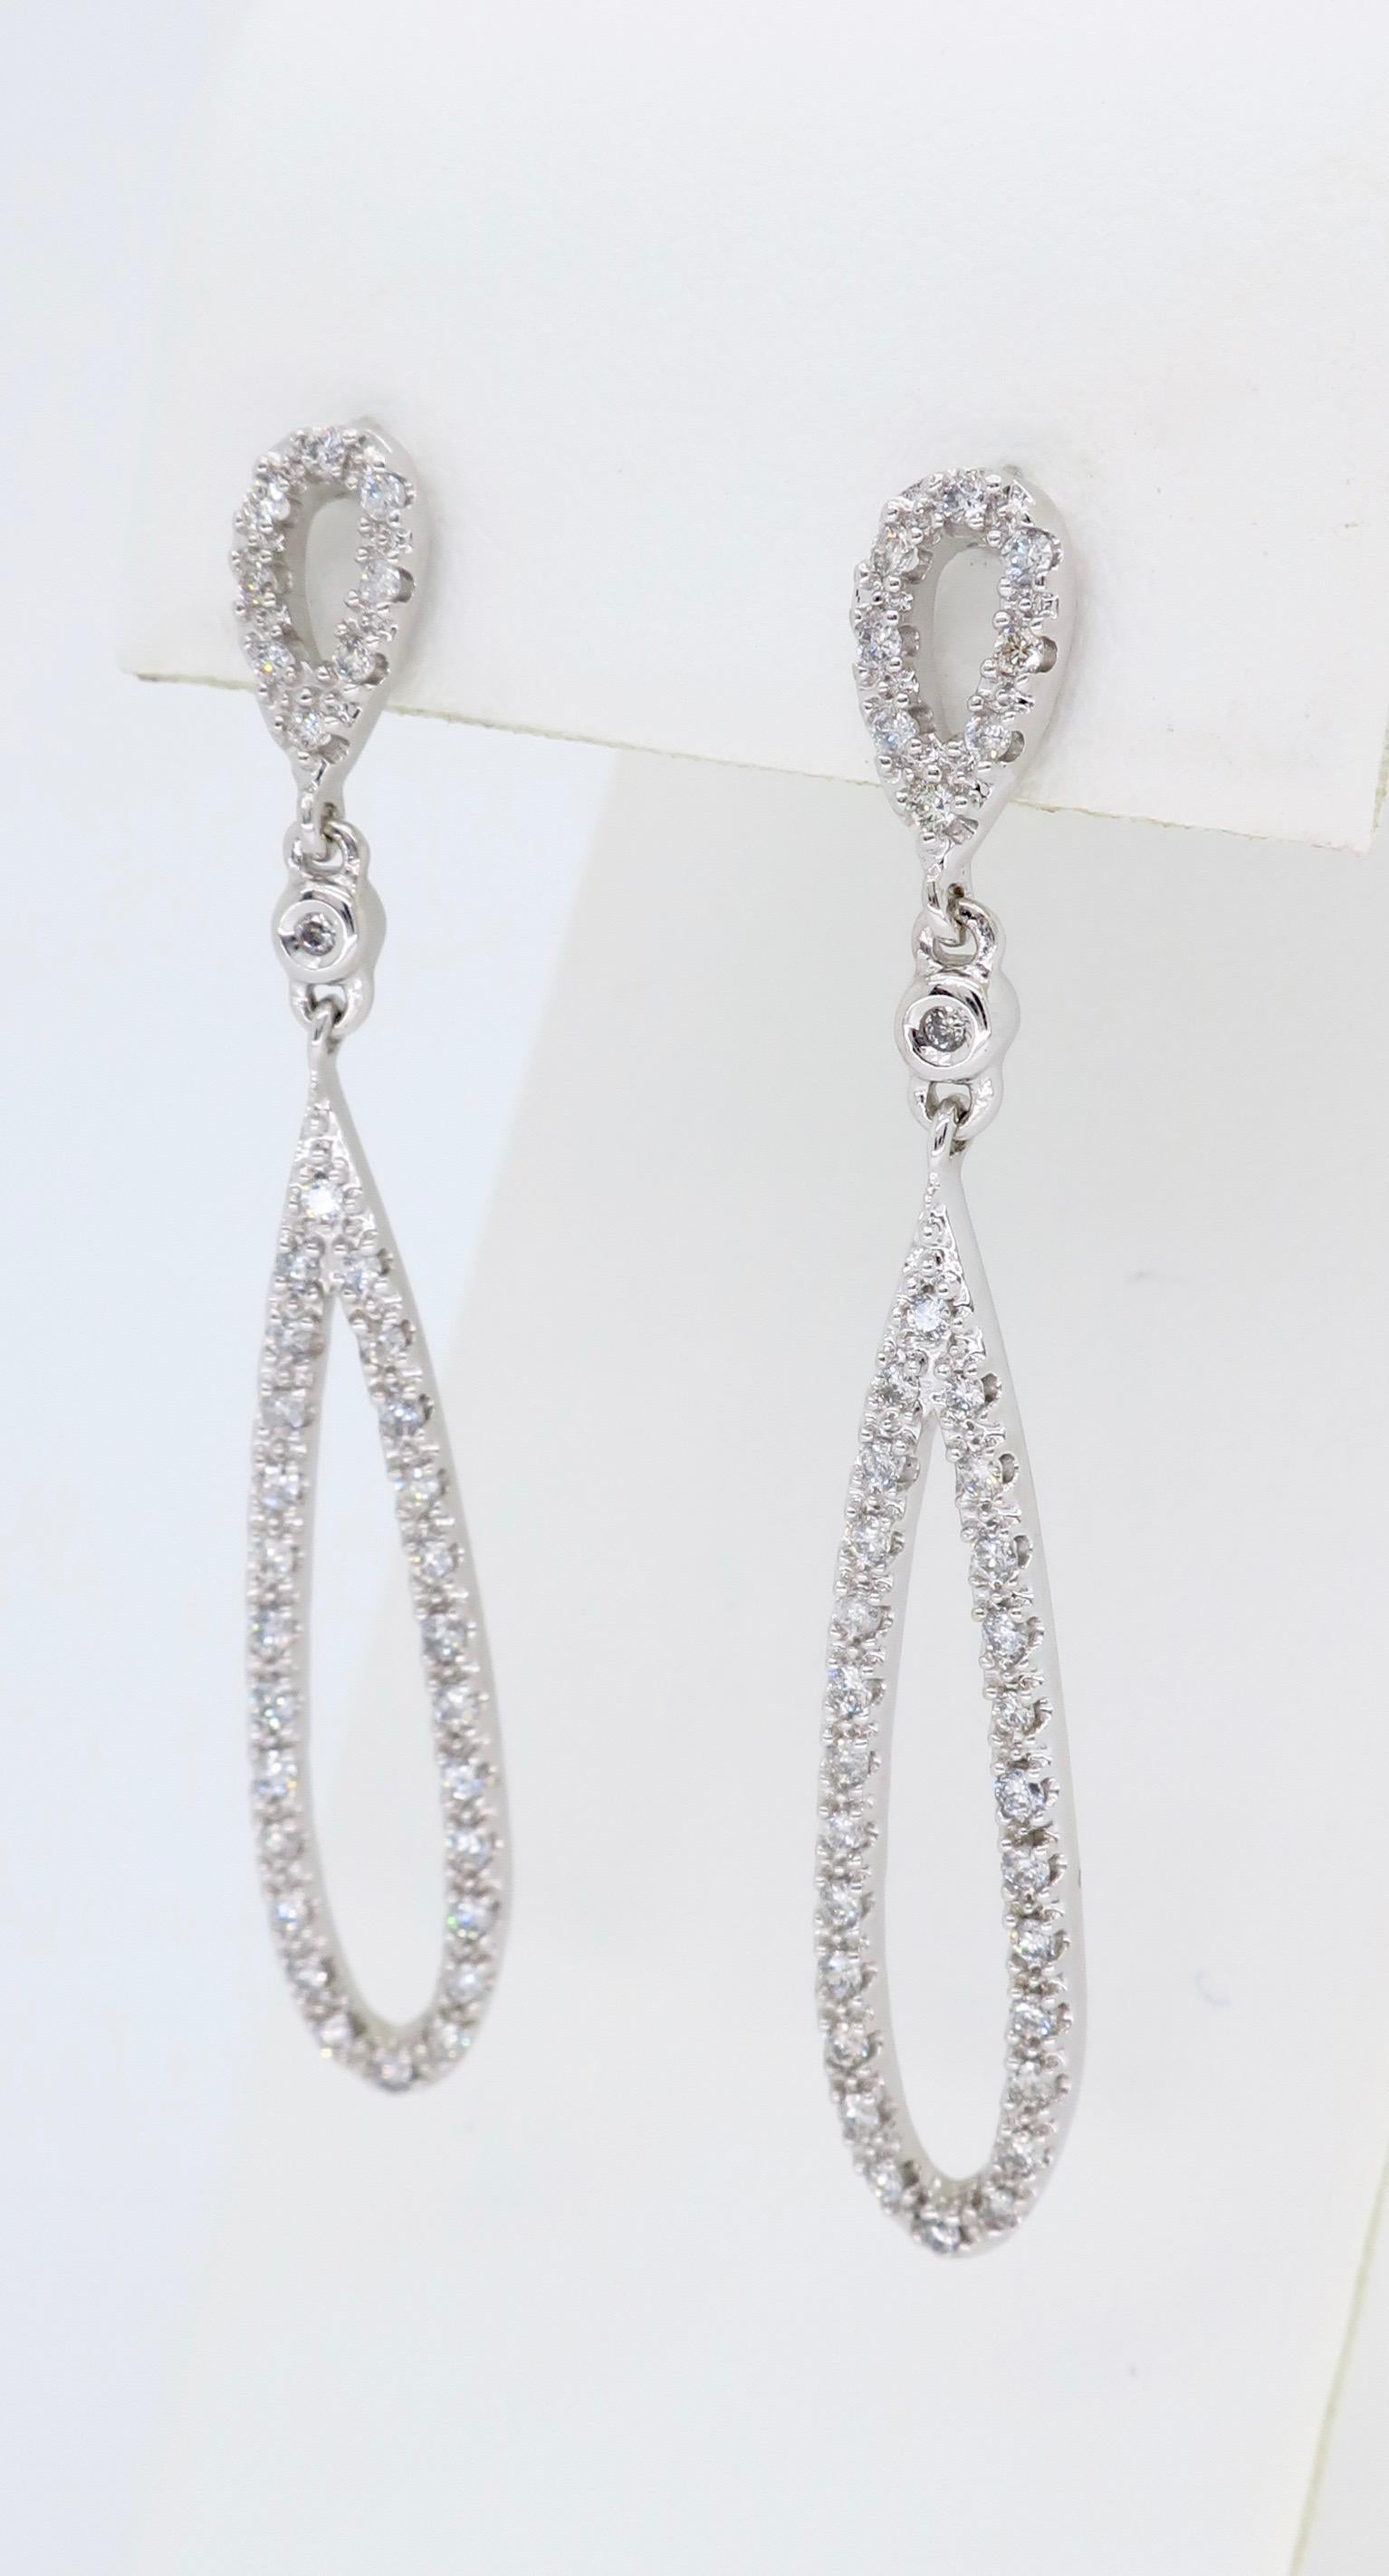 These stunning tear drop shaped diamond earrings contain approximately 1.00CTW of Round Brilliant Cut Diamonds set in 14K white gold.

Diamond Carat Weight: Approximately 1.00CTW 
Diamond Cut:  Round Brilliant
Color: Average G-J
Clarity: Average